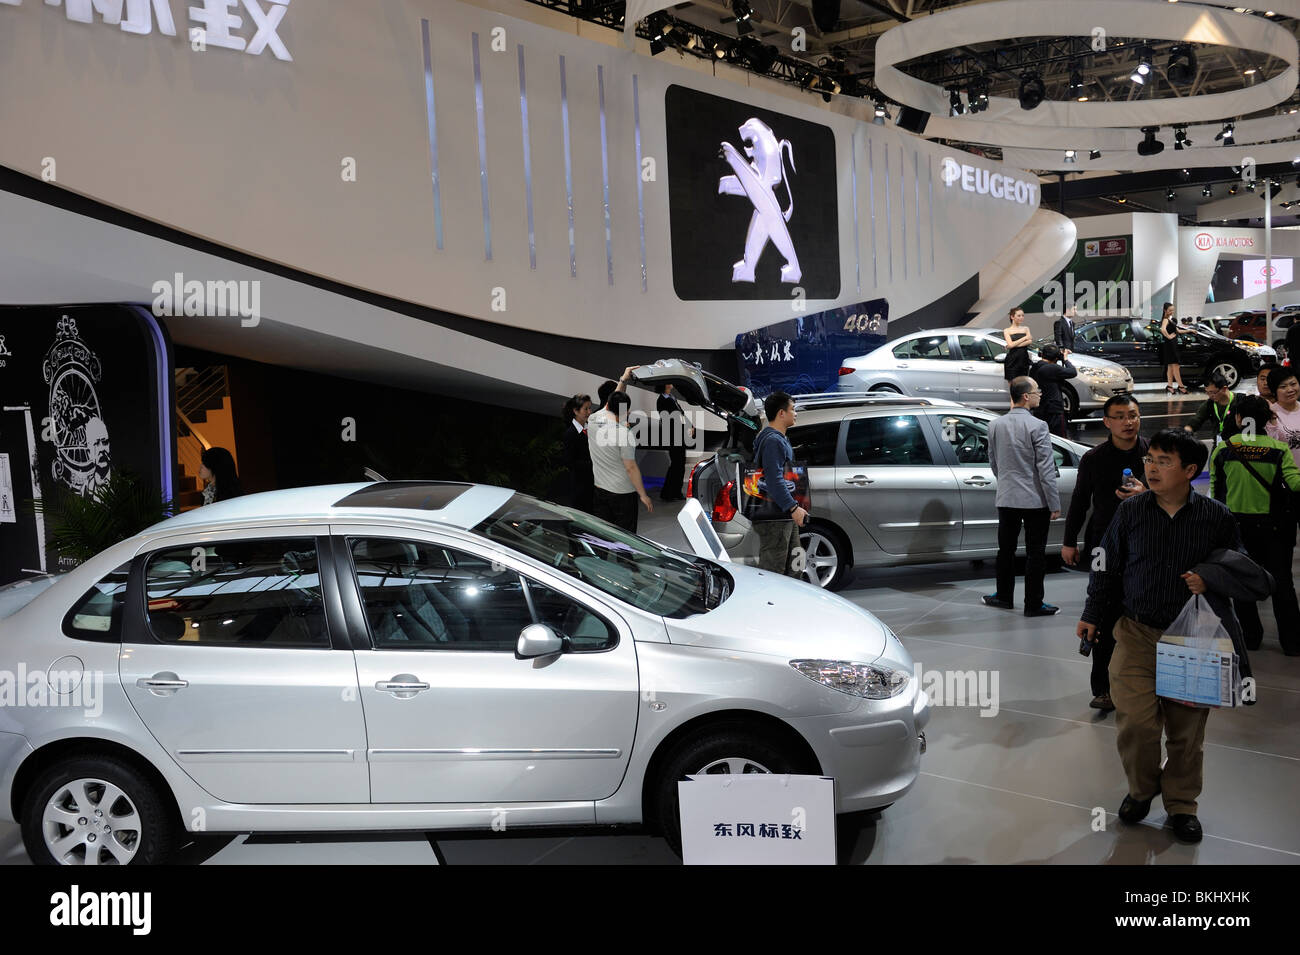 Peugeot stand at the Beijing Auto Show. 24-Apr-201 Stock Photo